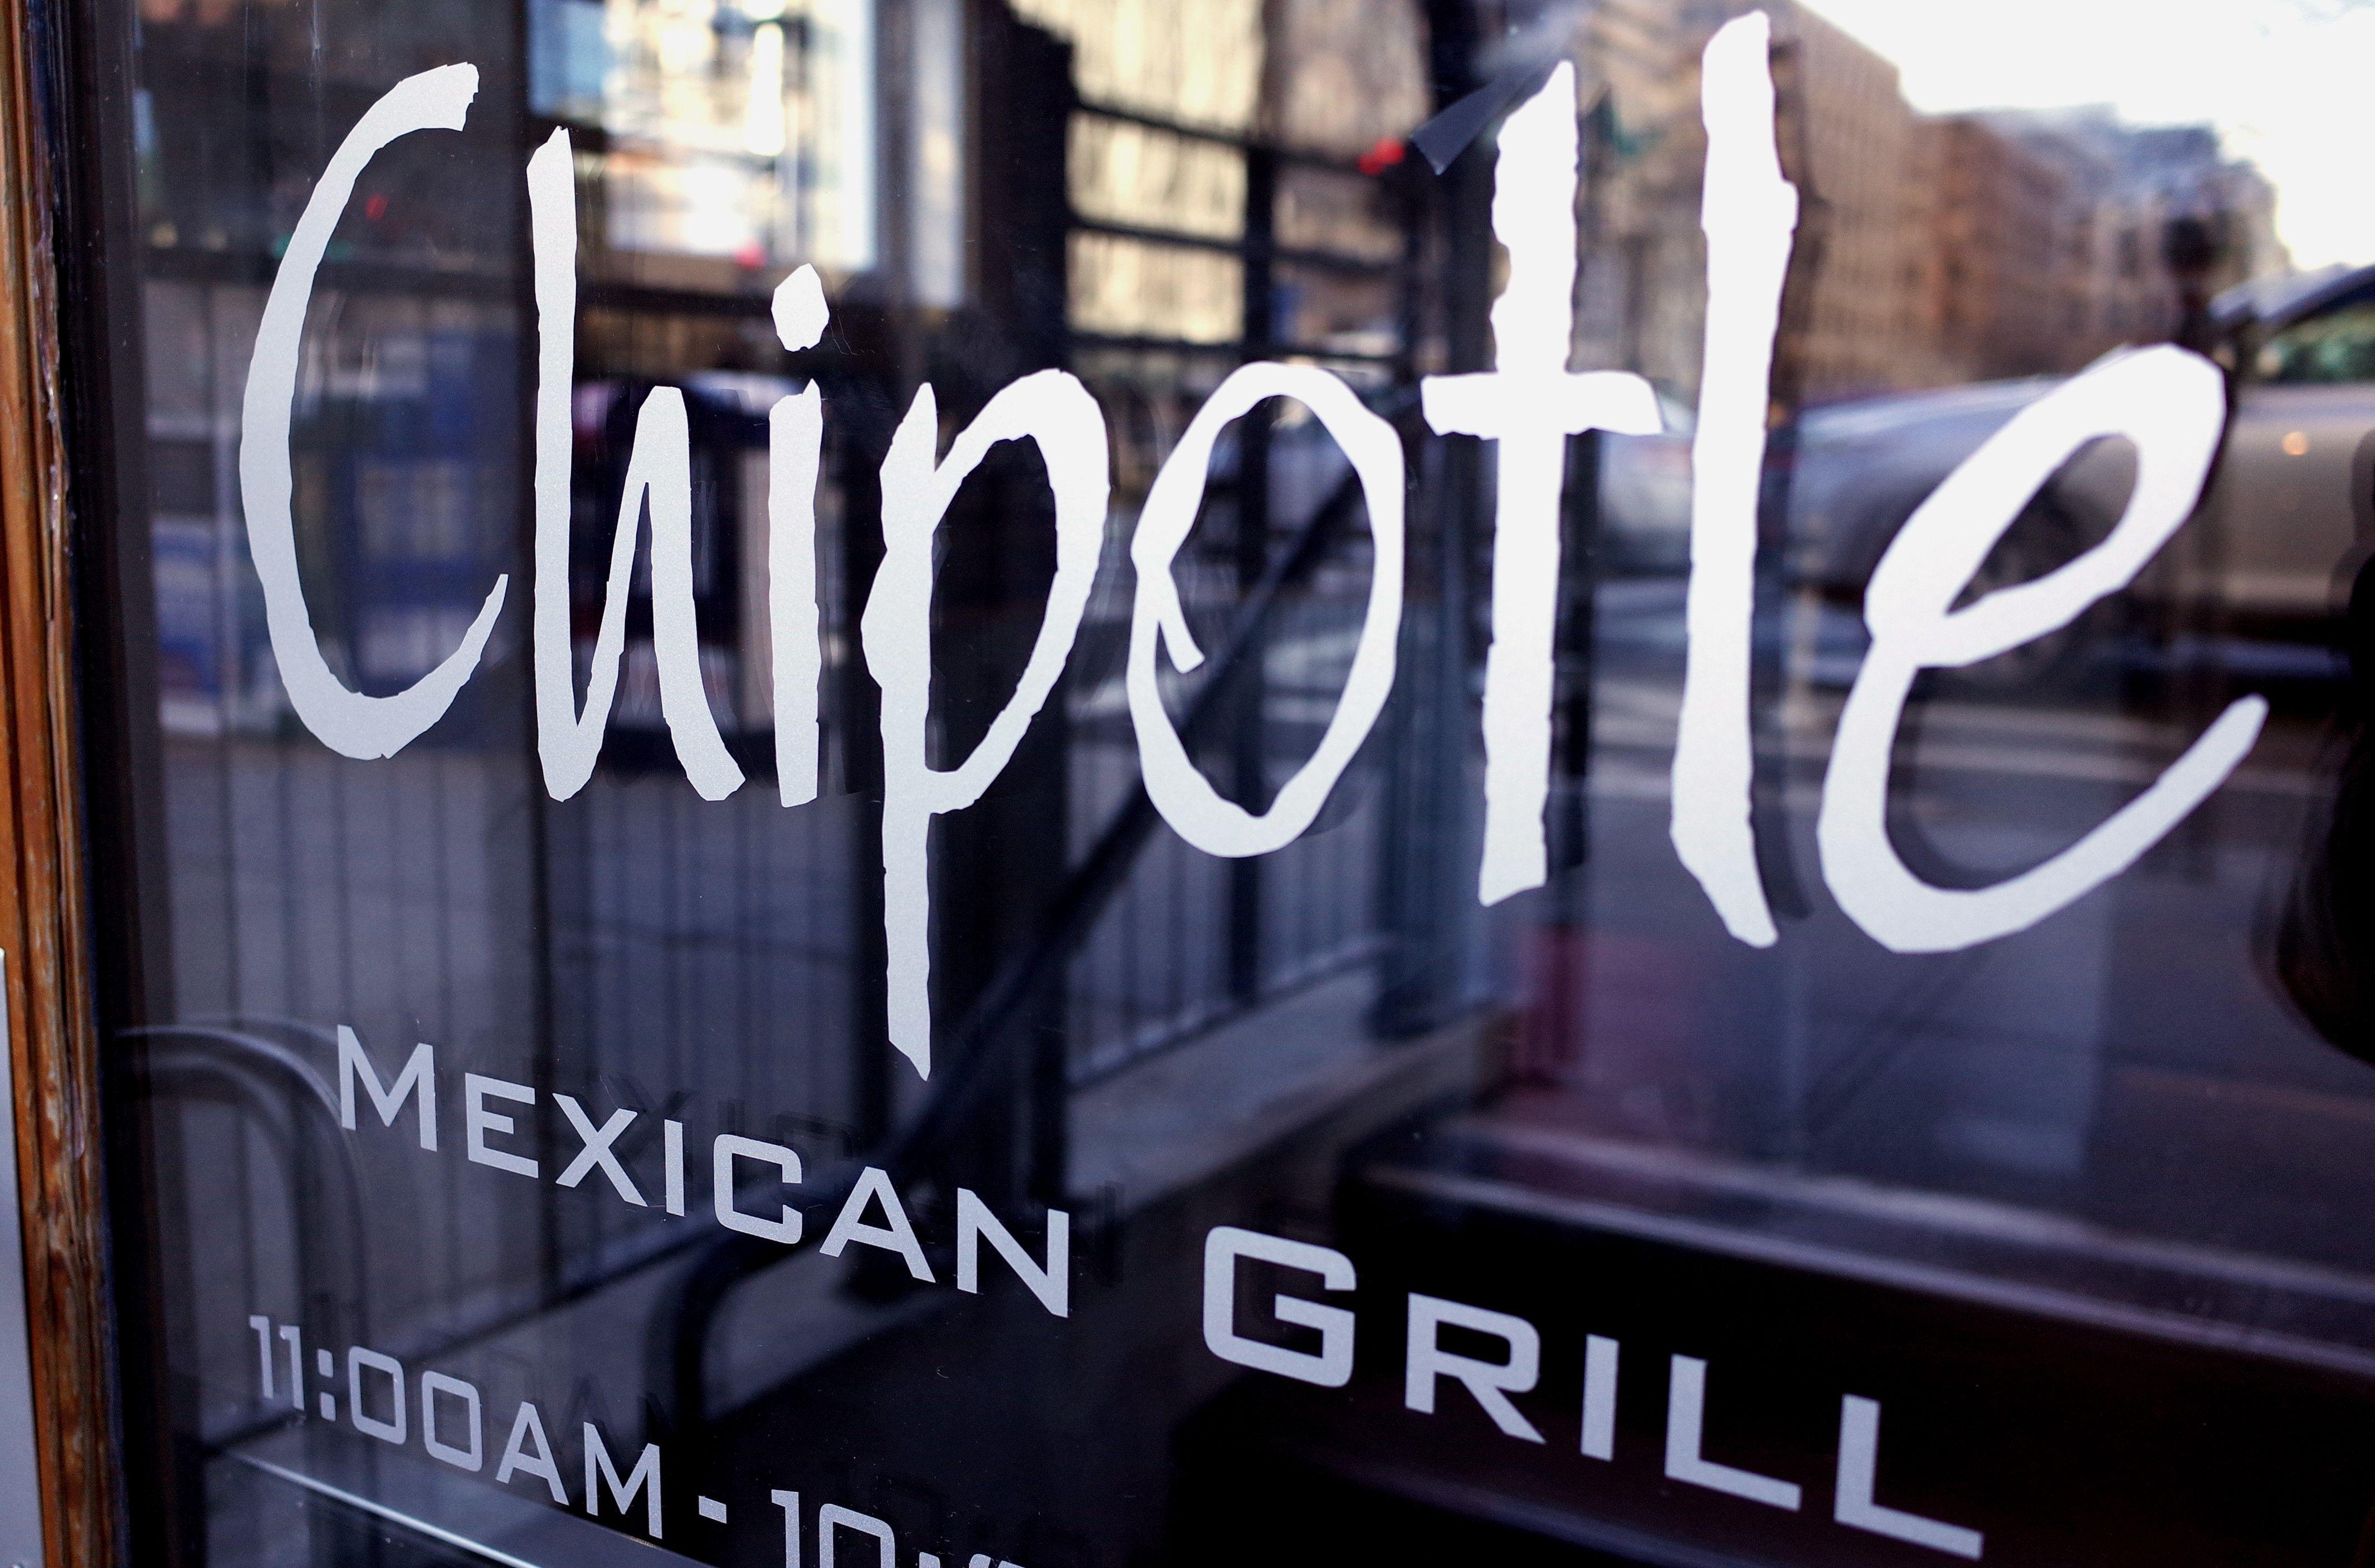 Chipotle Mexican Grill Logo - A Boston Burger Chain Is Accusing Chipotle of Stealing Its Name